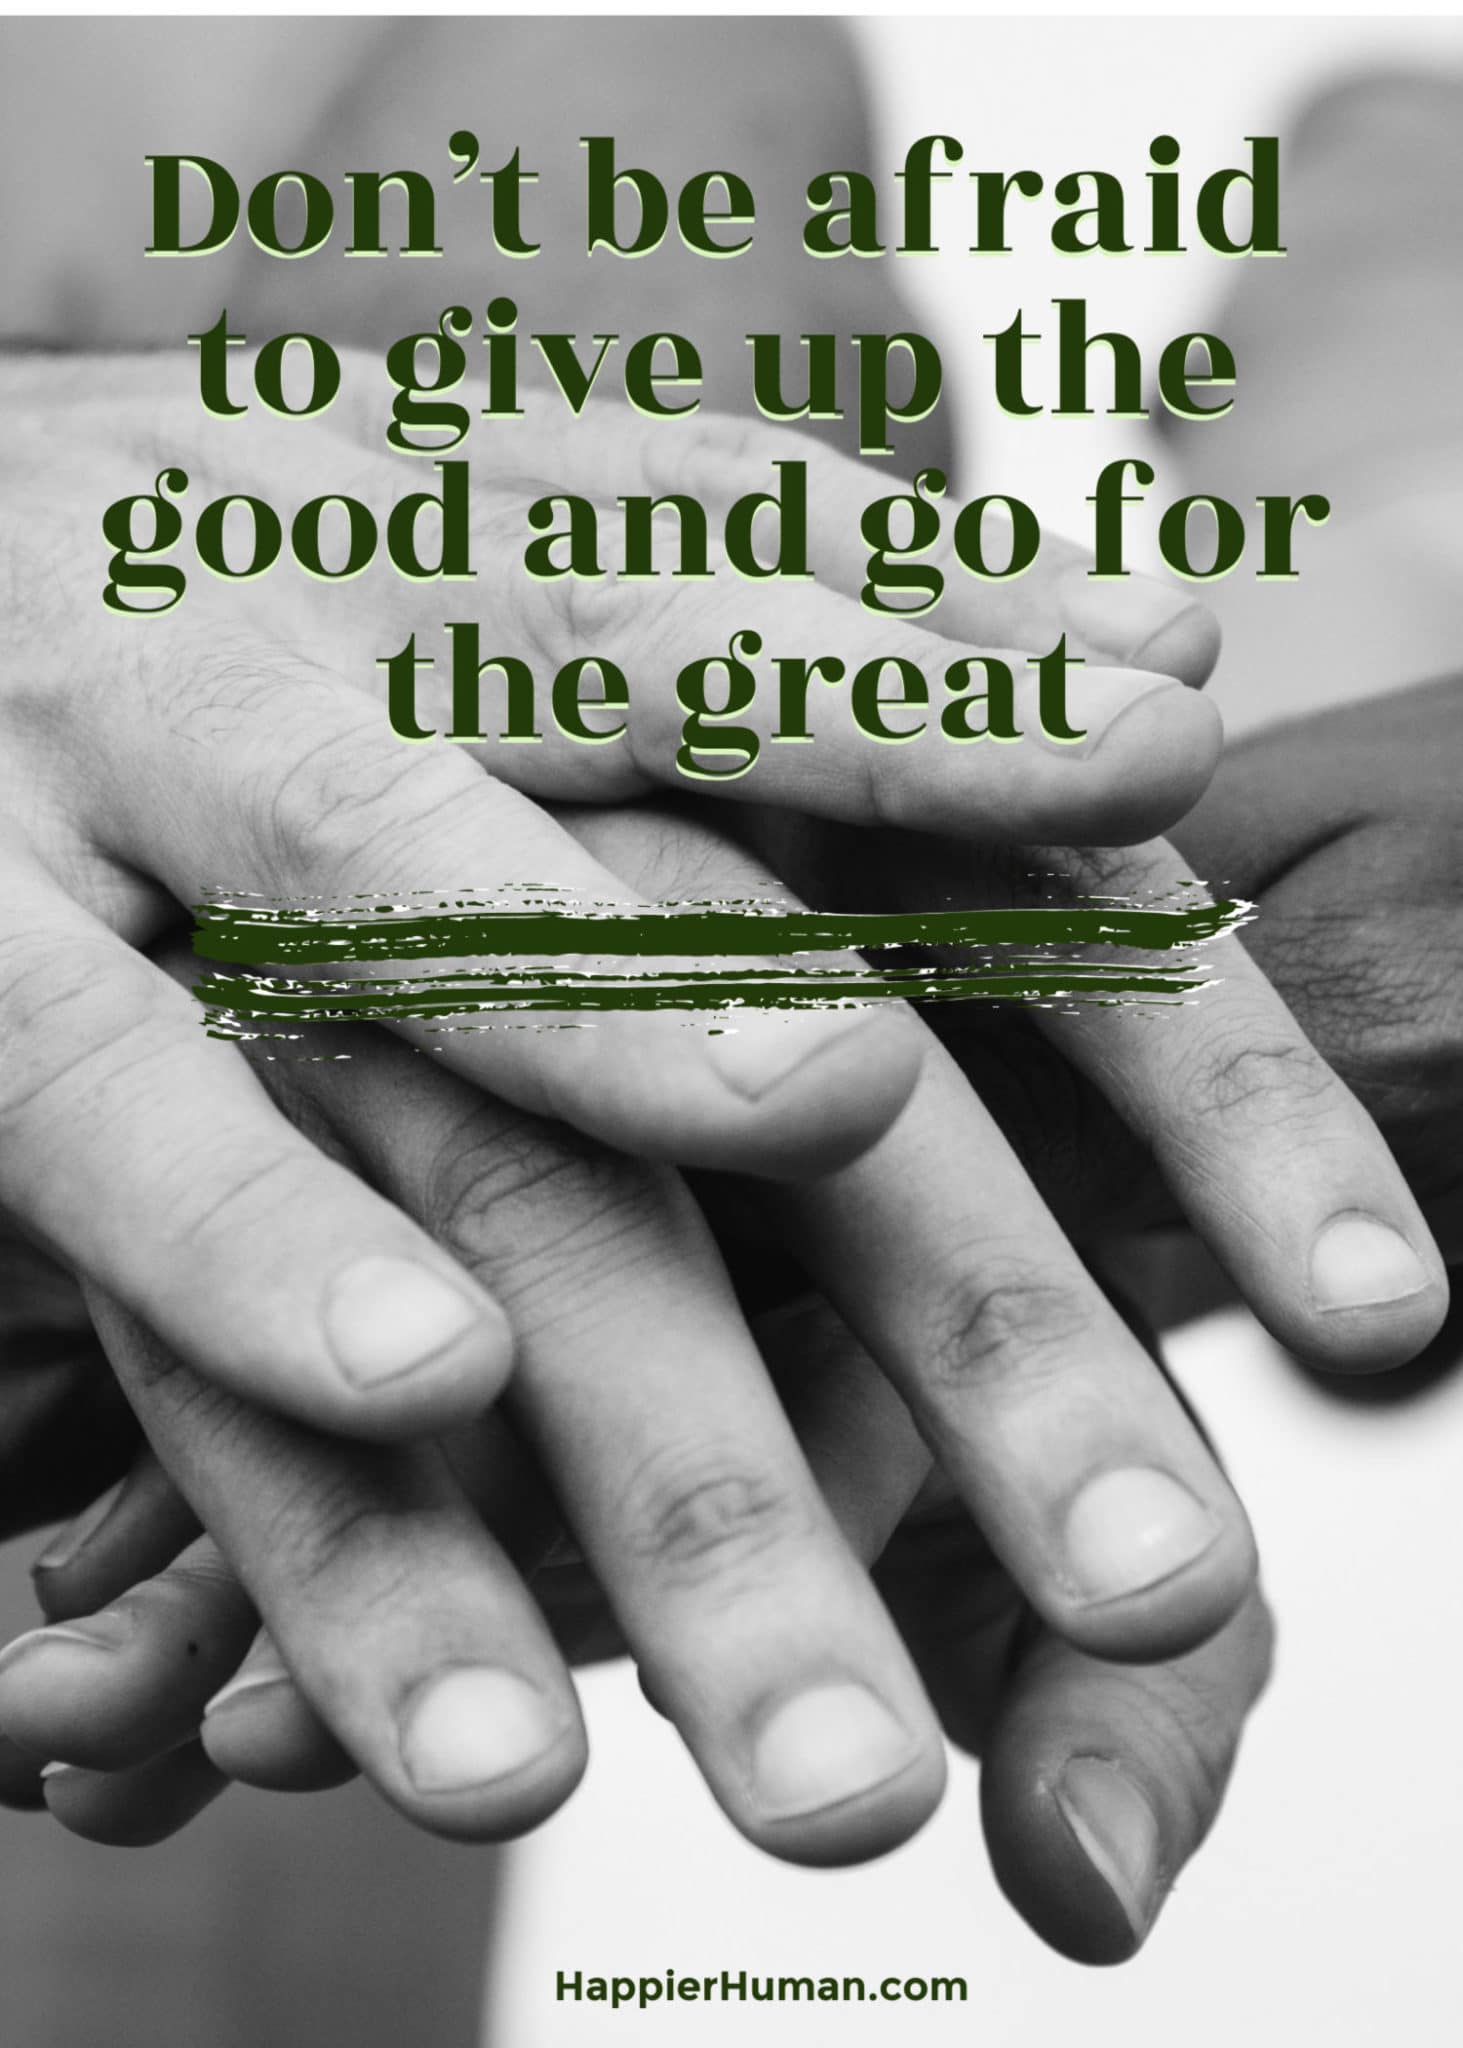 Don’t be afraid to give up the good and go for the great